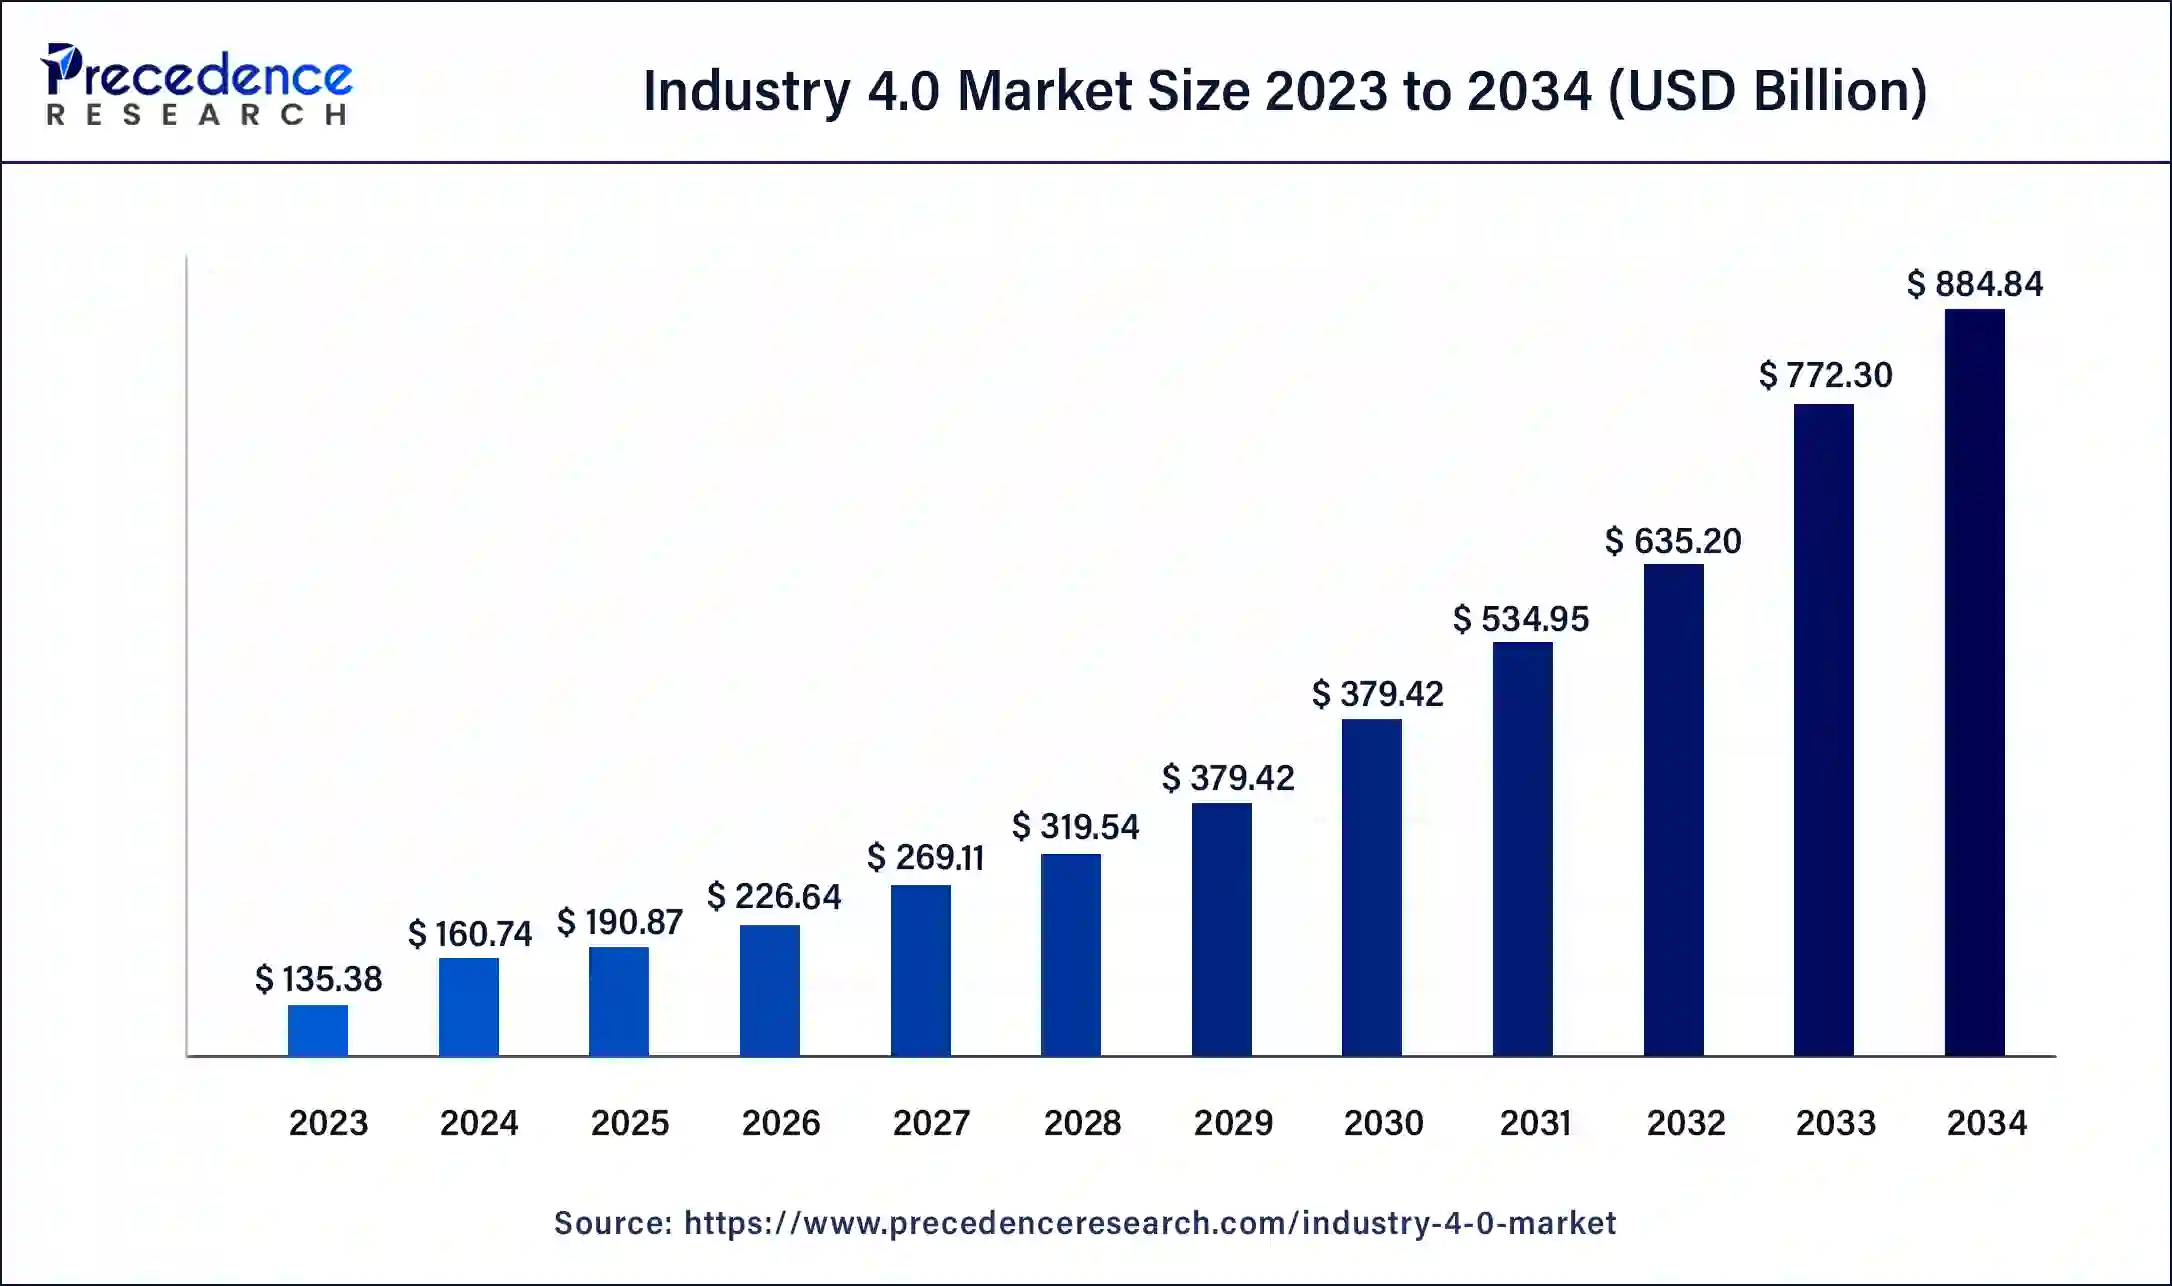 Industry 4.0 Market Size 2024 To 2034